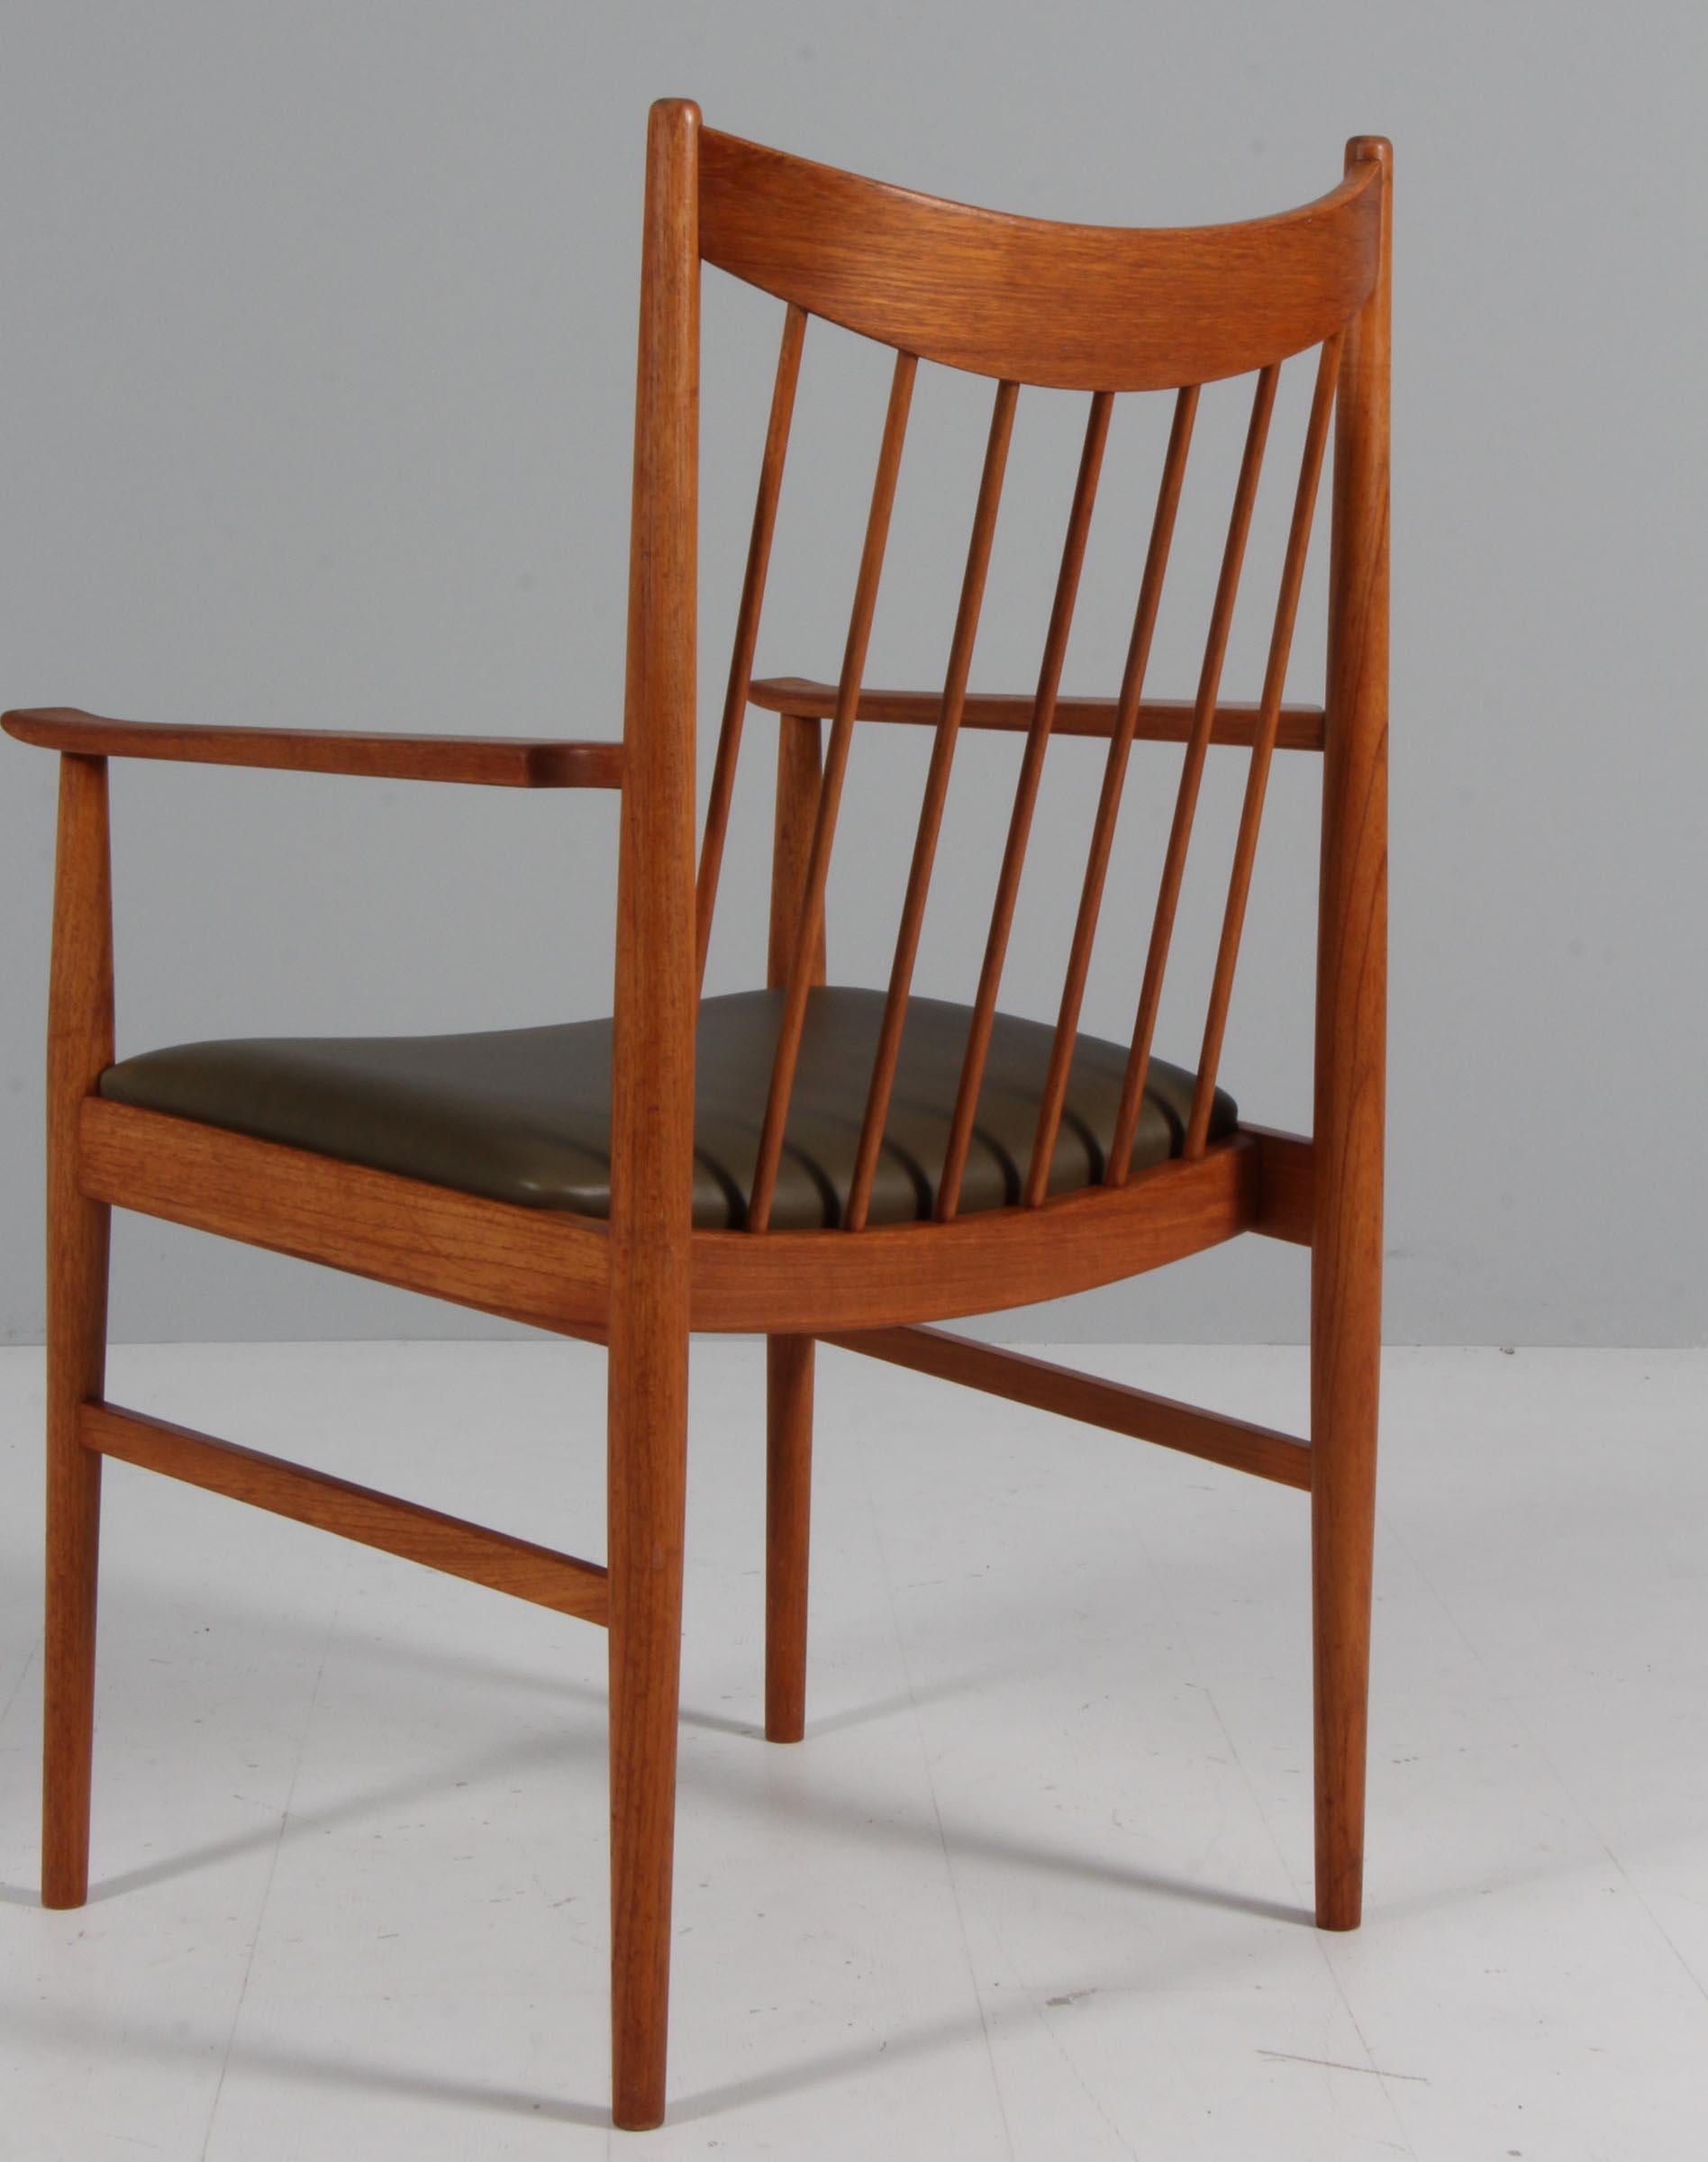 Leather Arne Vodder Armchair in teak and aniline leather, Sibast. For Sale